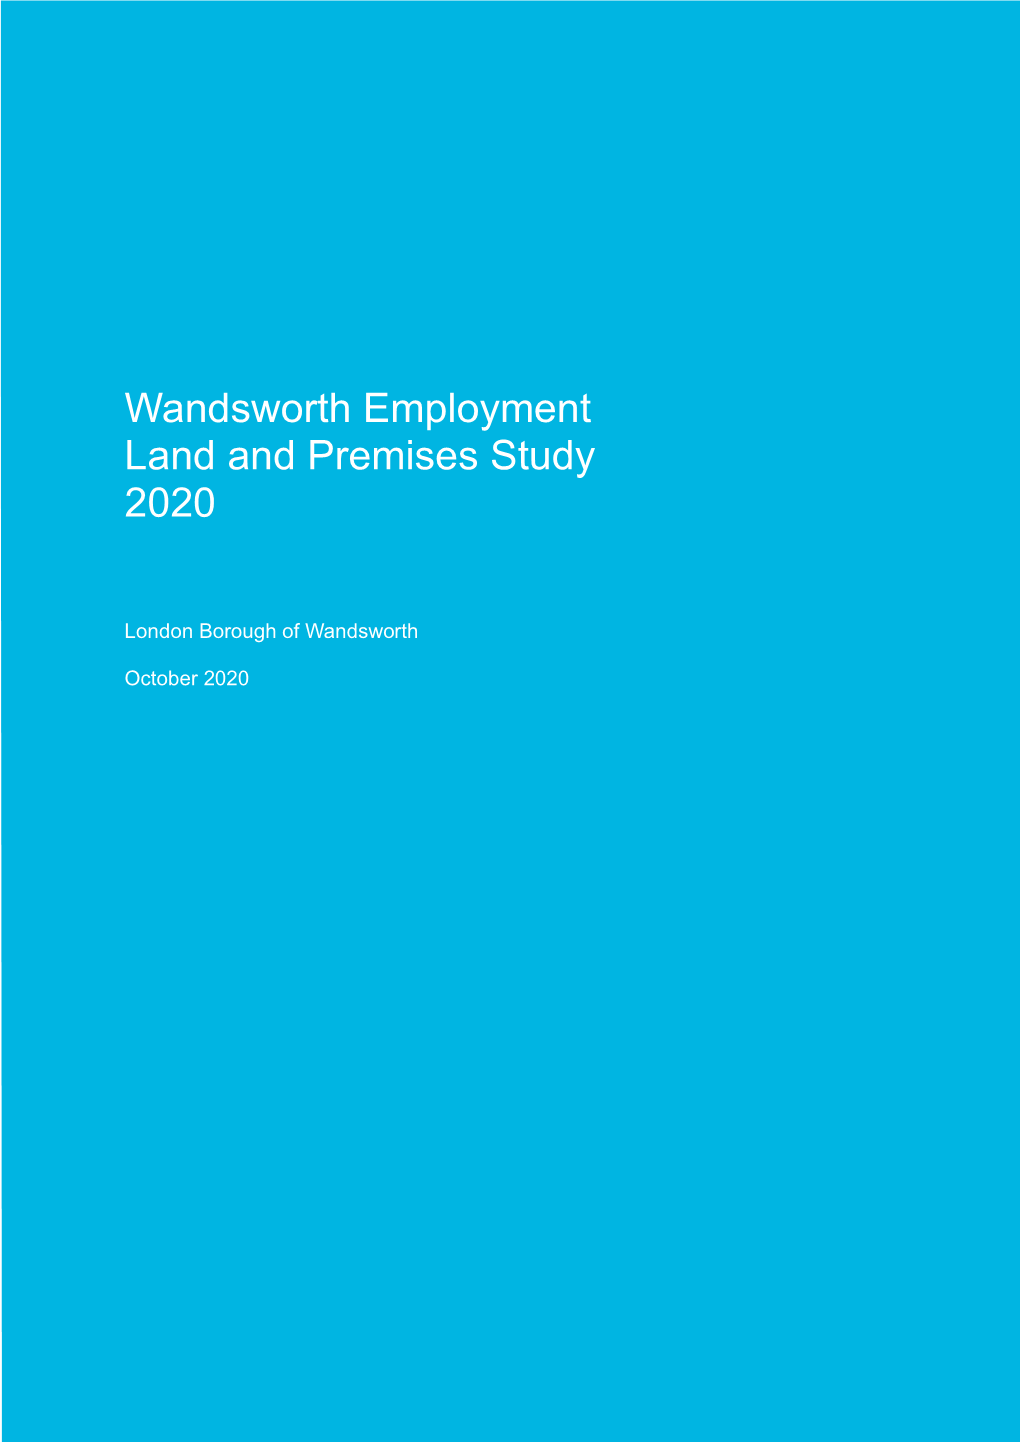 Wandsworth Employment Land and Premises Study 2020